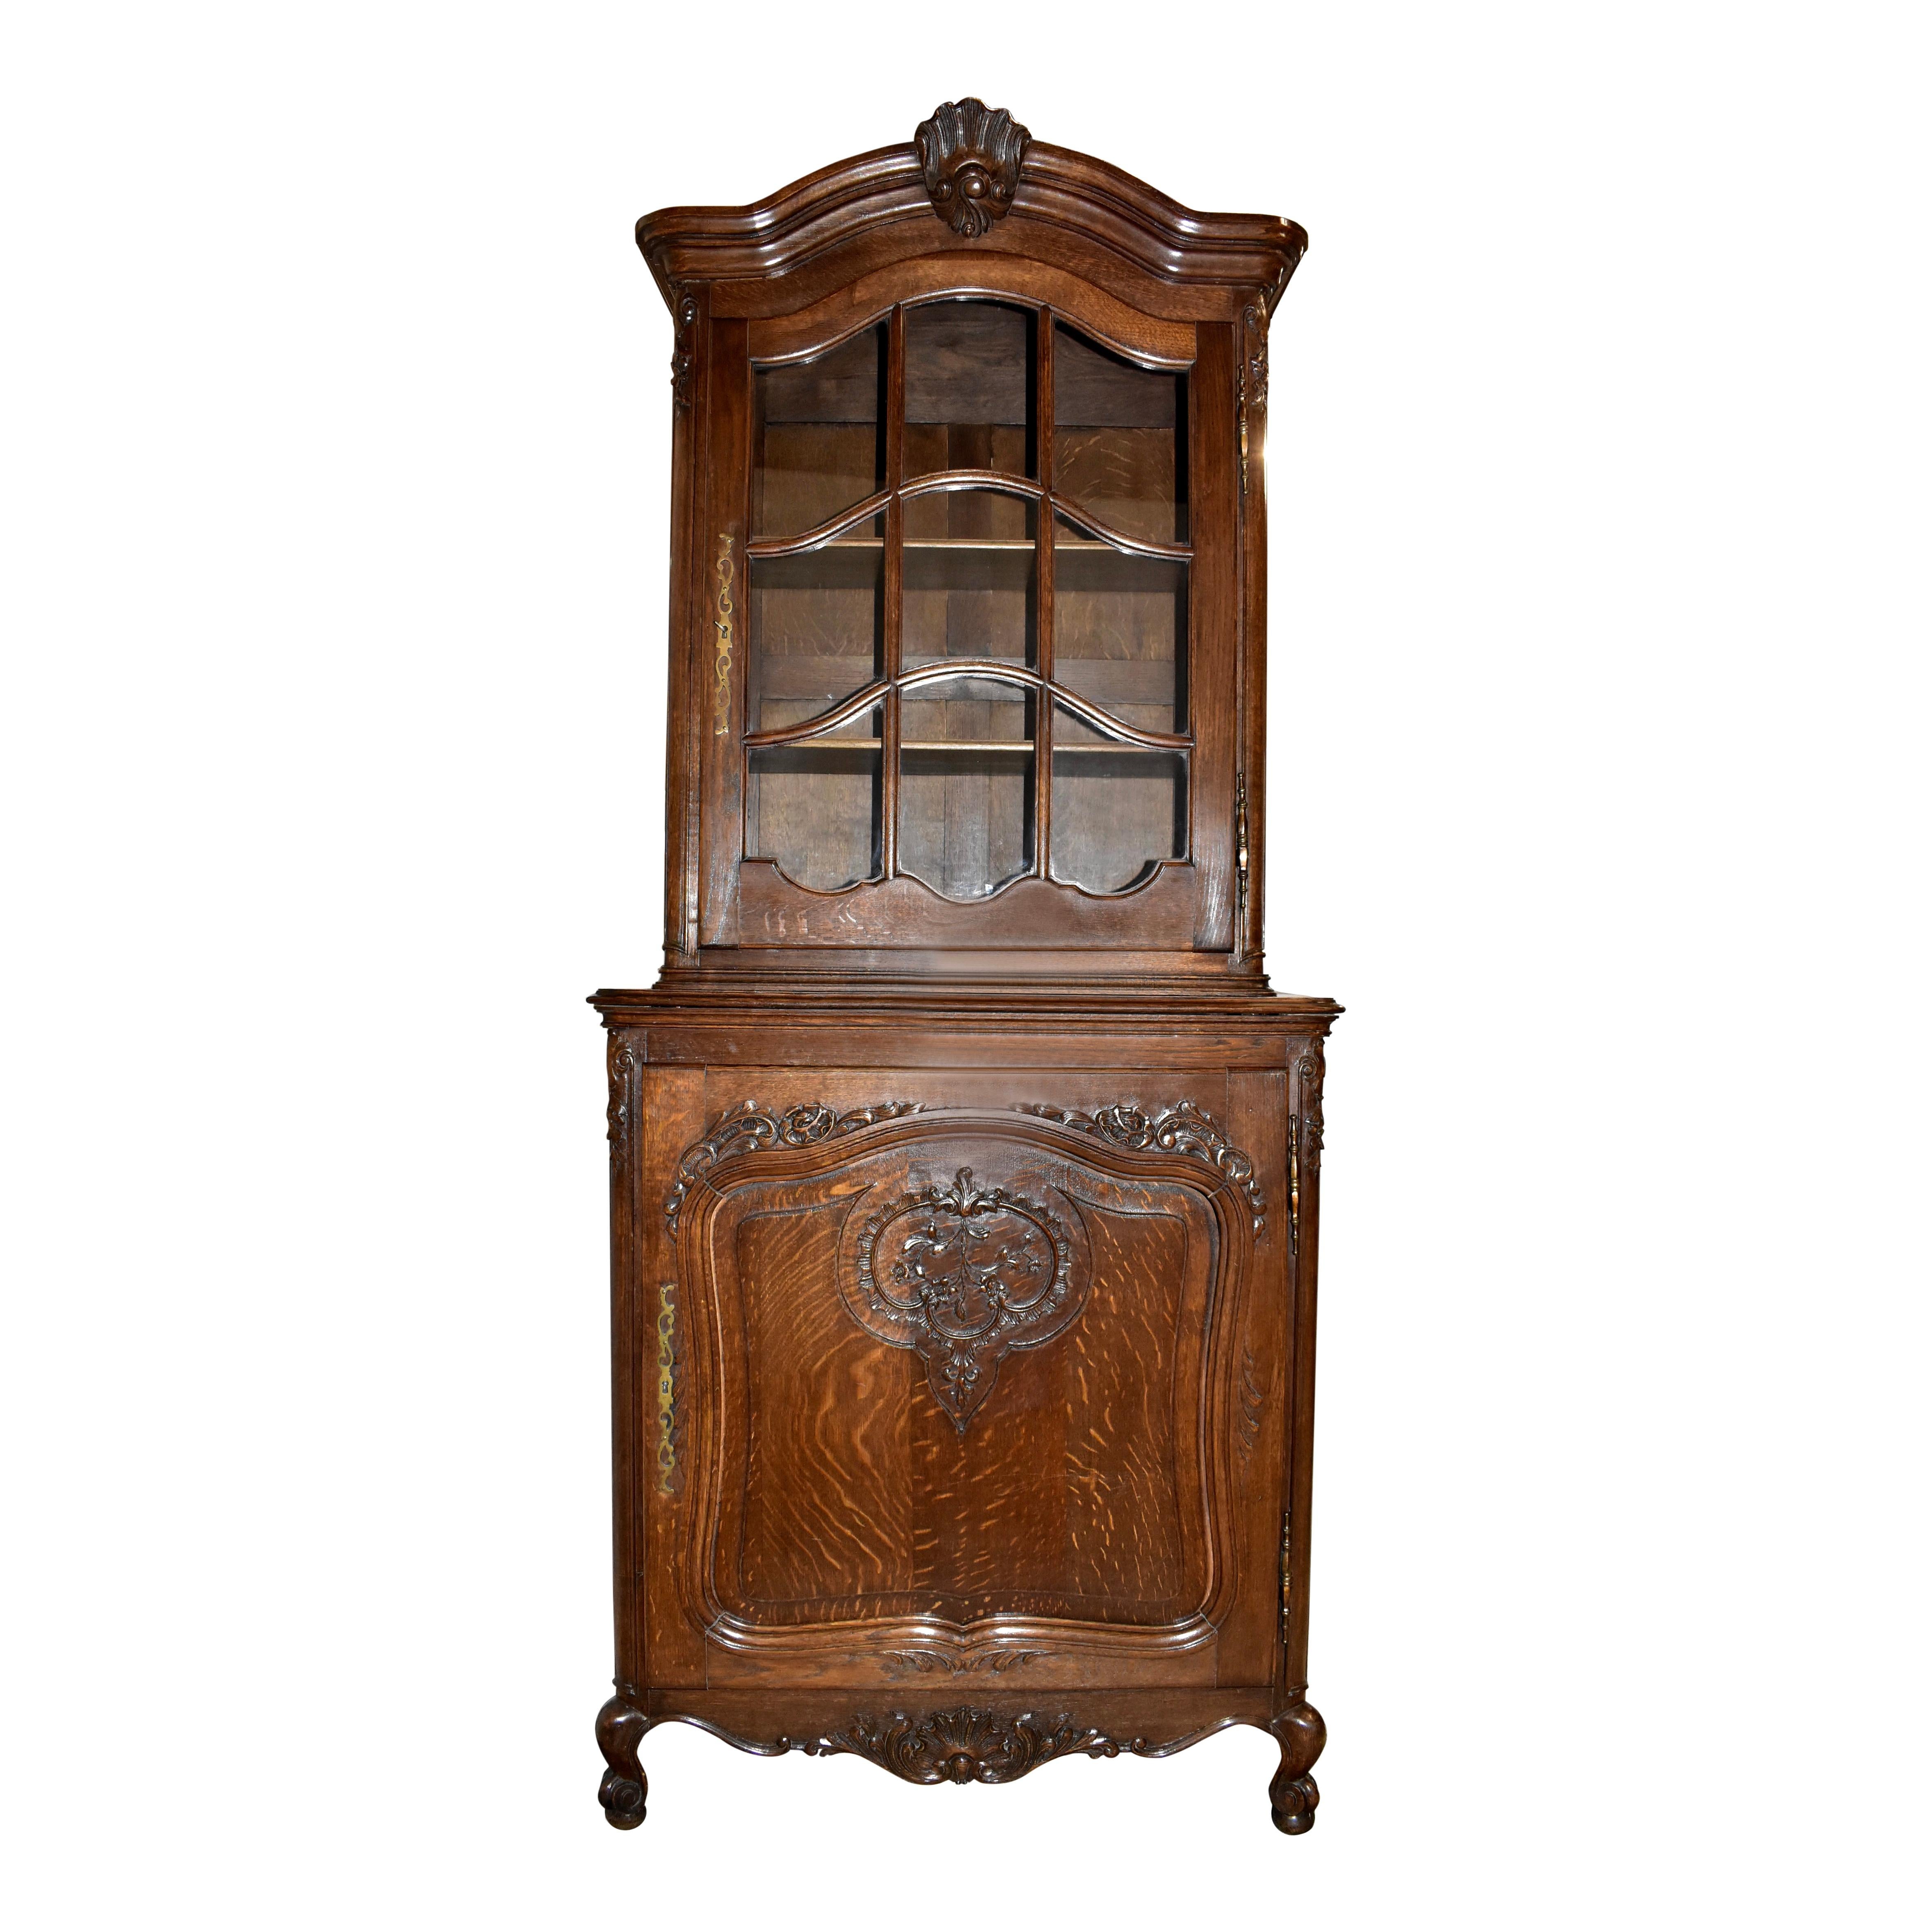 This elegant double bodied vitrine pairs solid oak construction with the soft, graceful lines of an arched pediment, rounded front corners, and cabriole legs. The top portion showcases an arched crown with a central carved shell over an arched glass